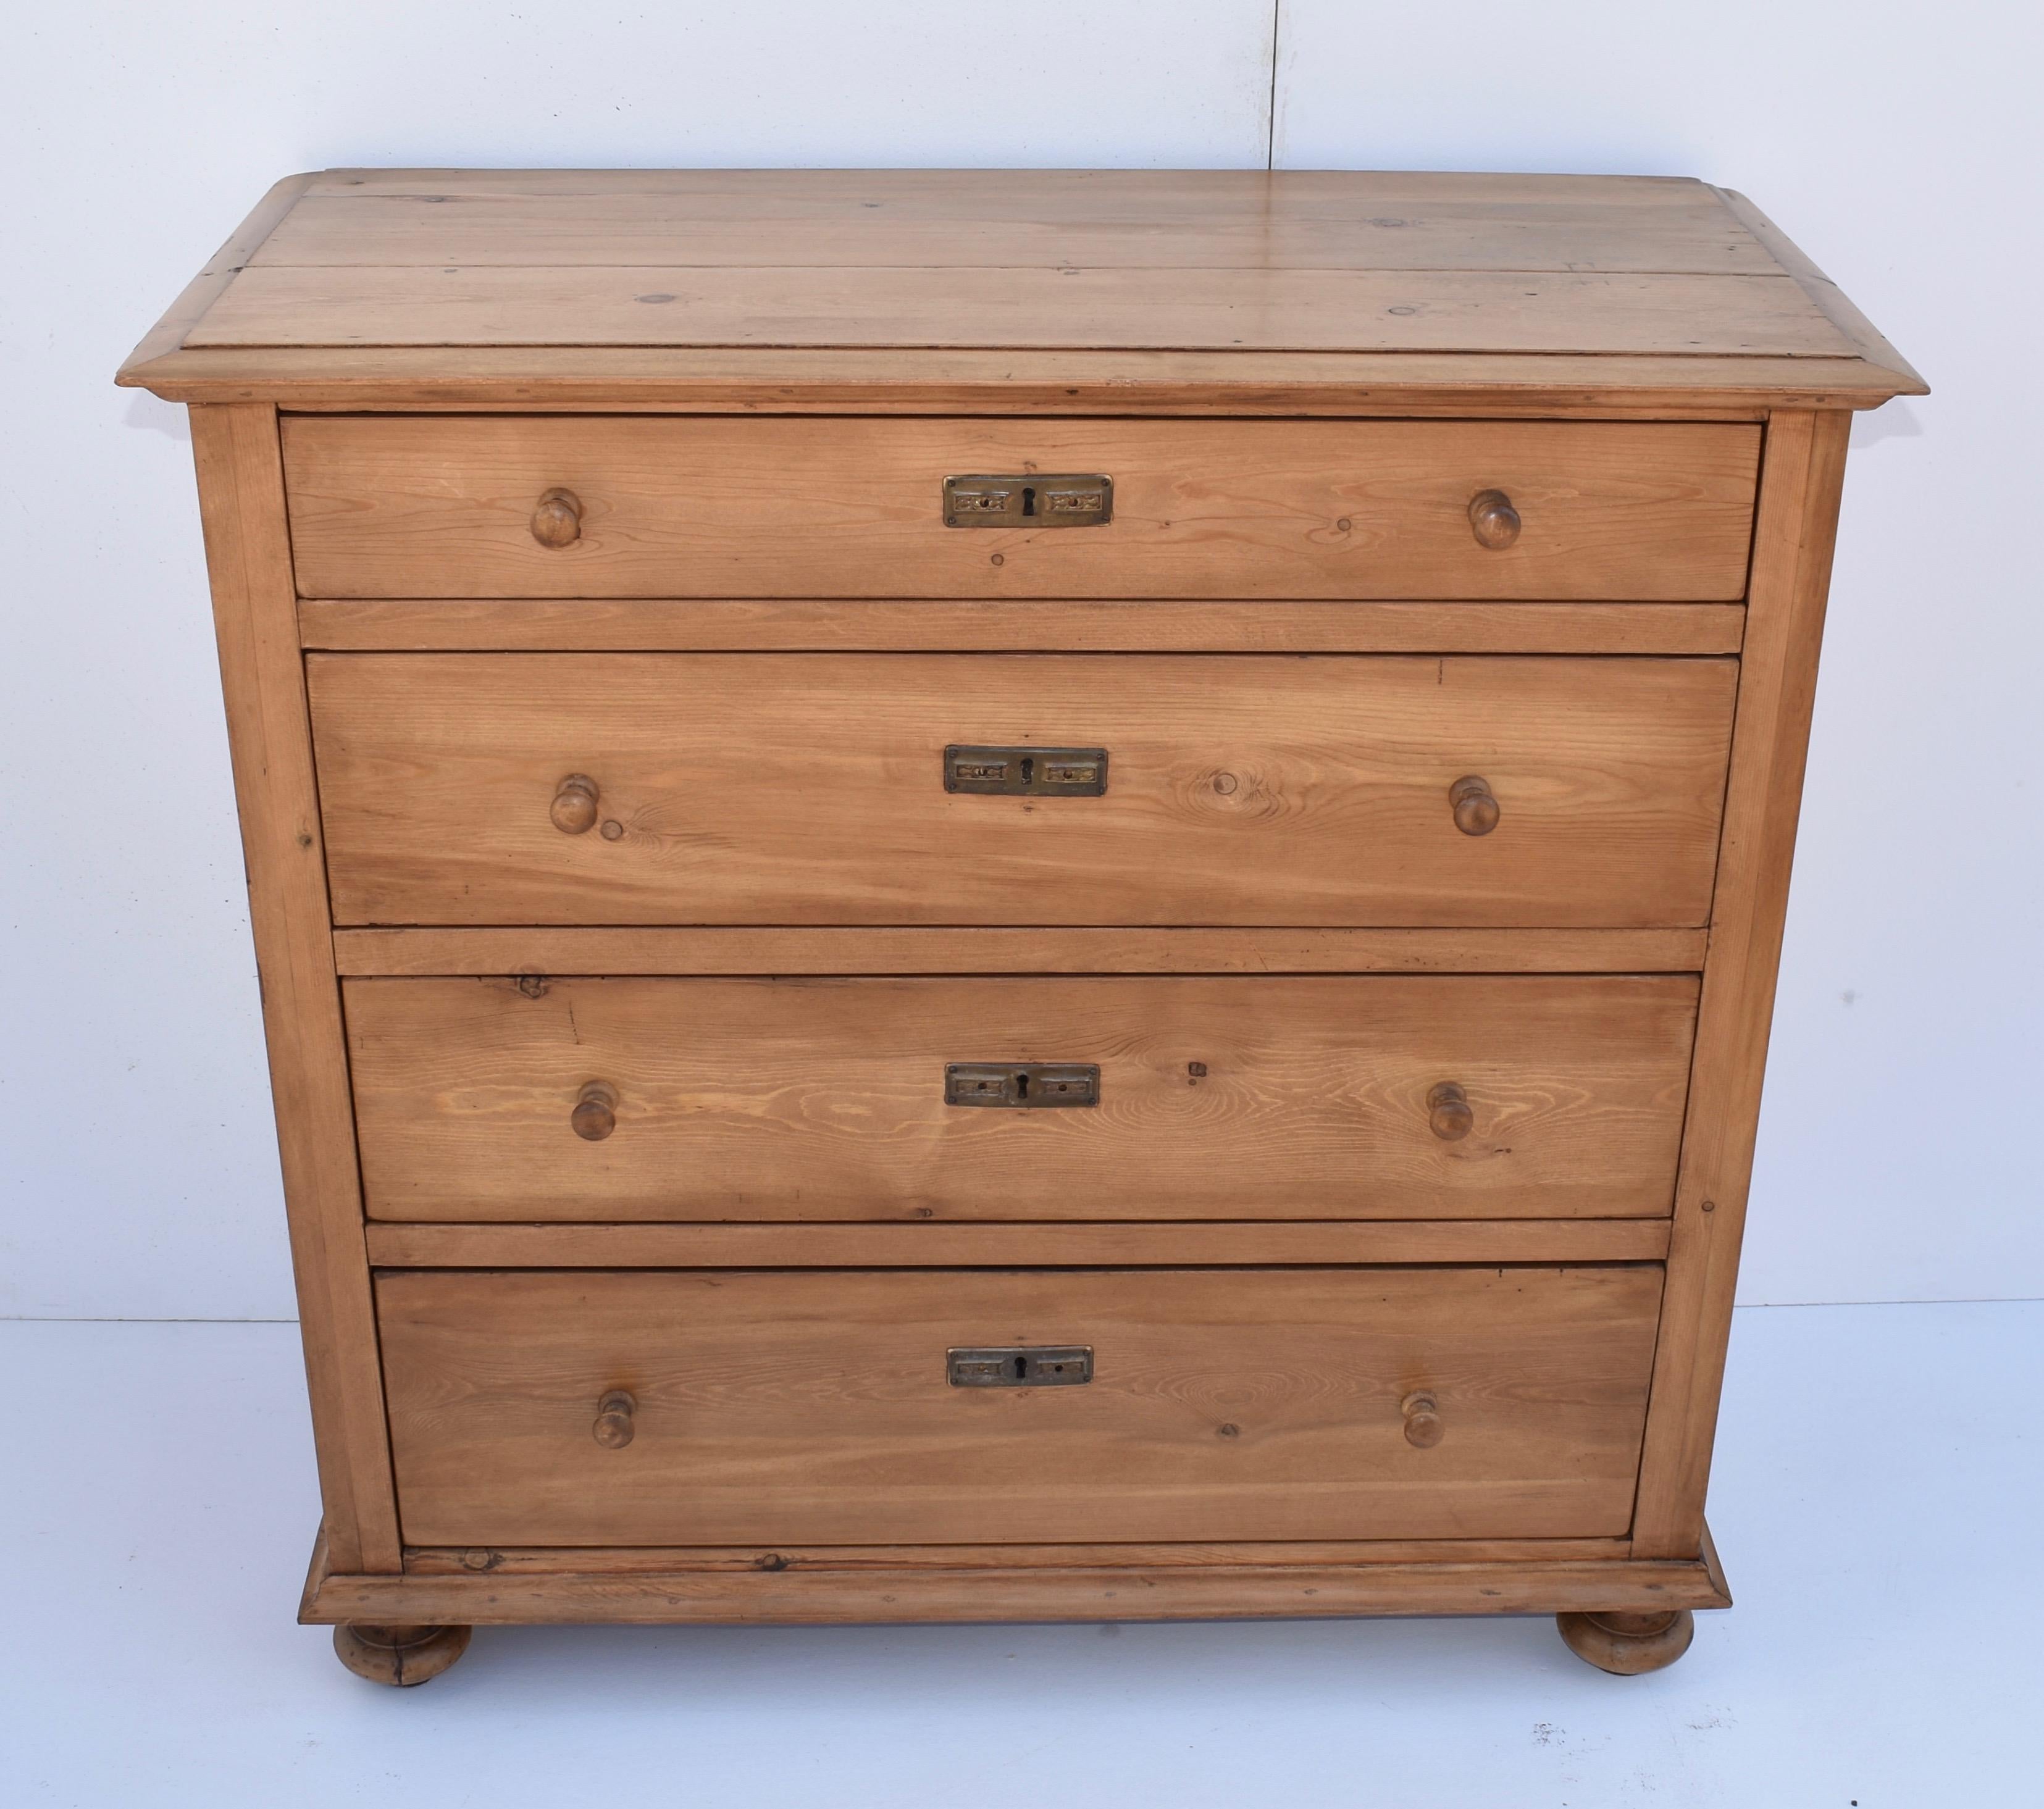 This is a plain chest of four hand-cut dovetailed drawers, its straight lines almost shaker-like in their simplicity. An excellent piece for anywhere shallow profile storage is needed.